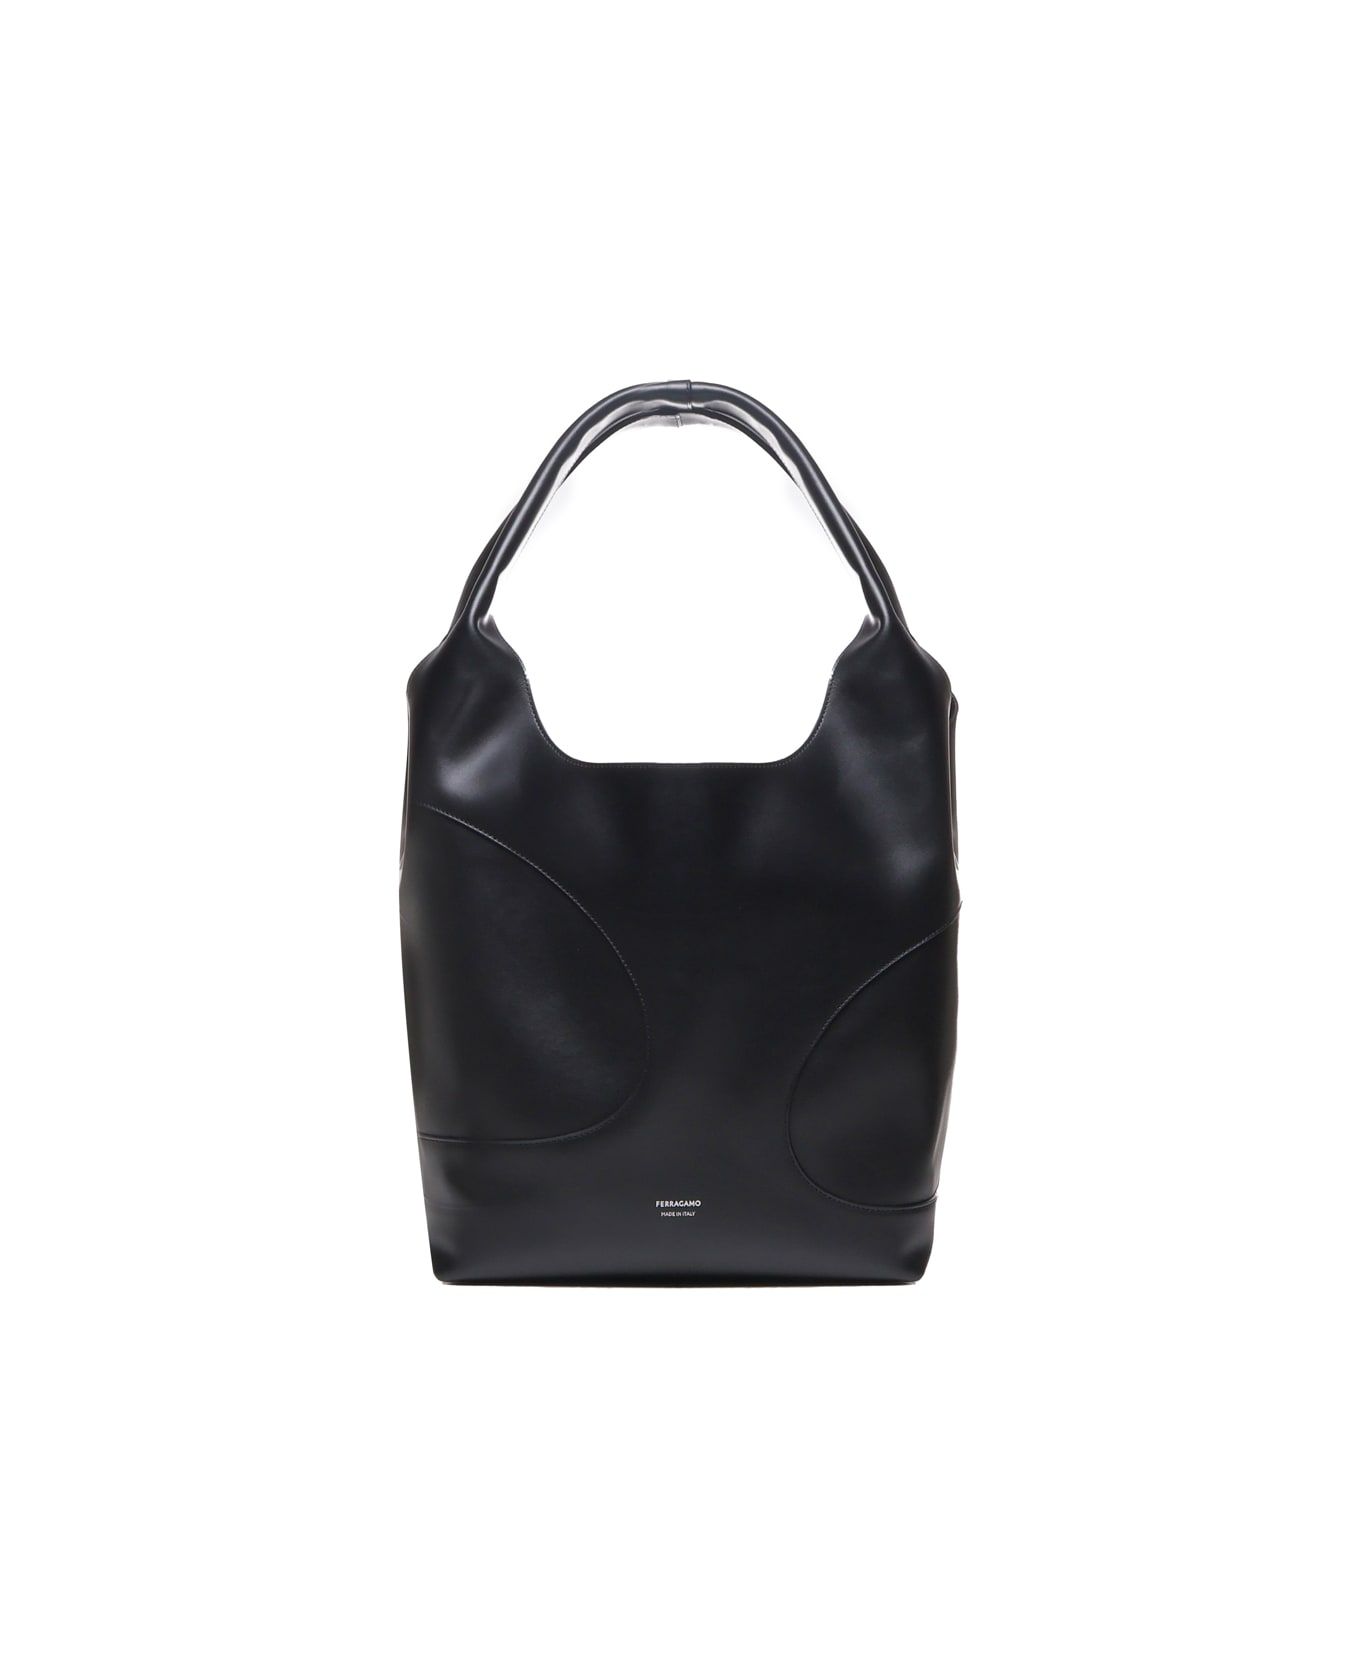 Ferragamo Tote Bag With Cut-out - Black トートバッグ